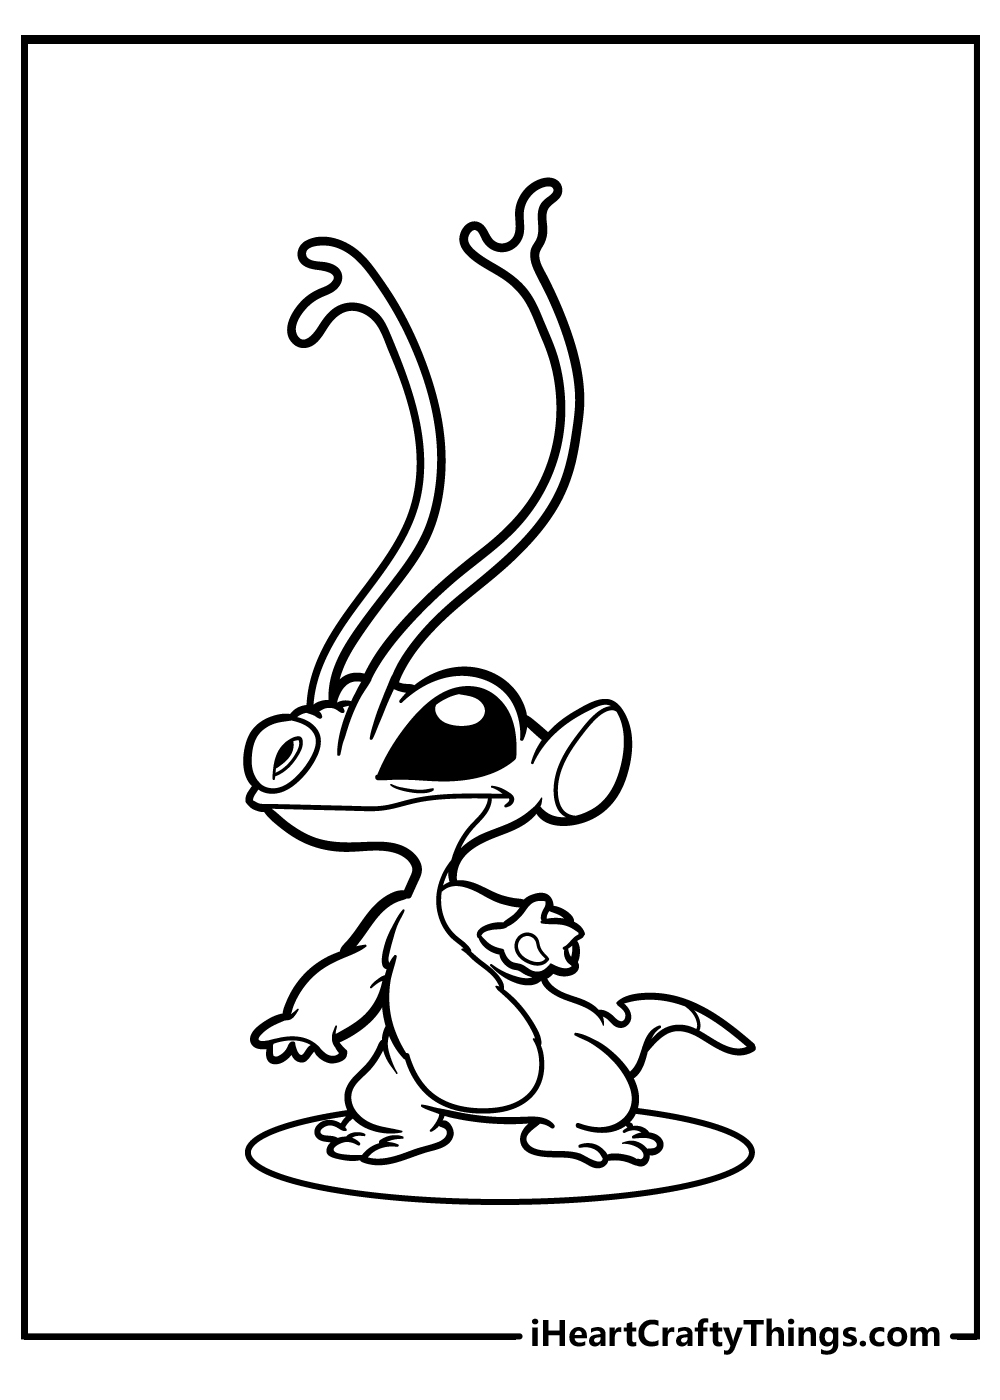 Lilo & Stitch Coloring Pages Updated 20